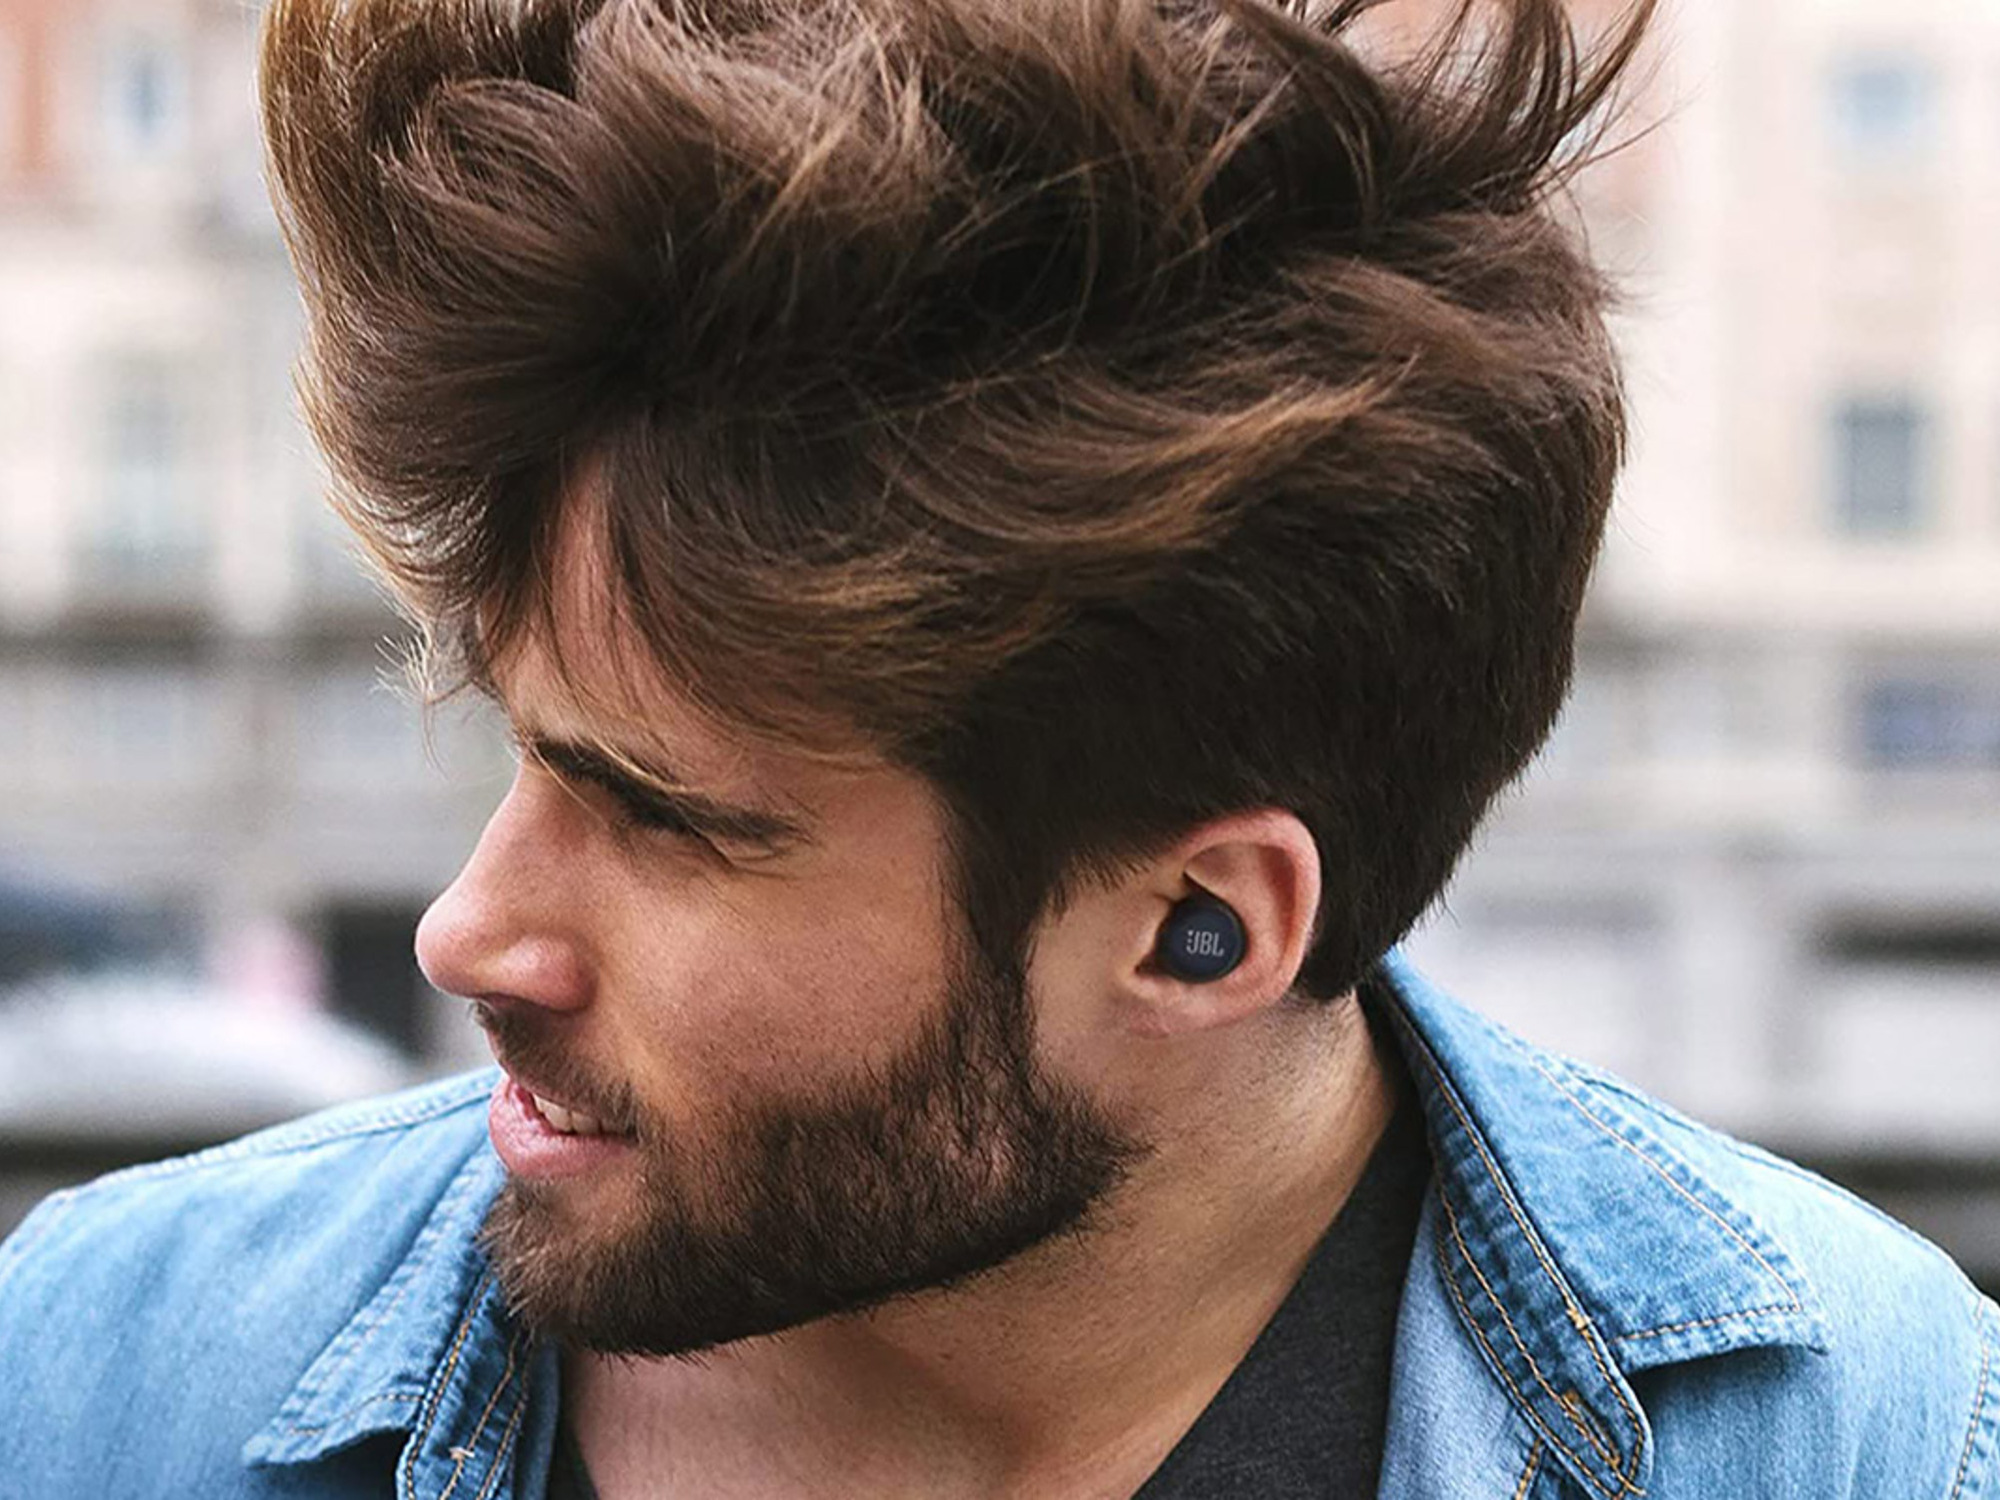 These Bluetooth earbuds make a great stocking stuffer at $100 off